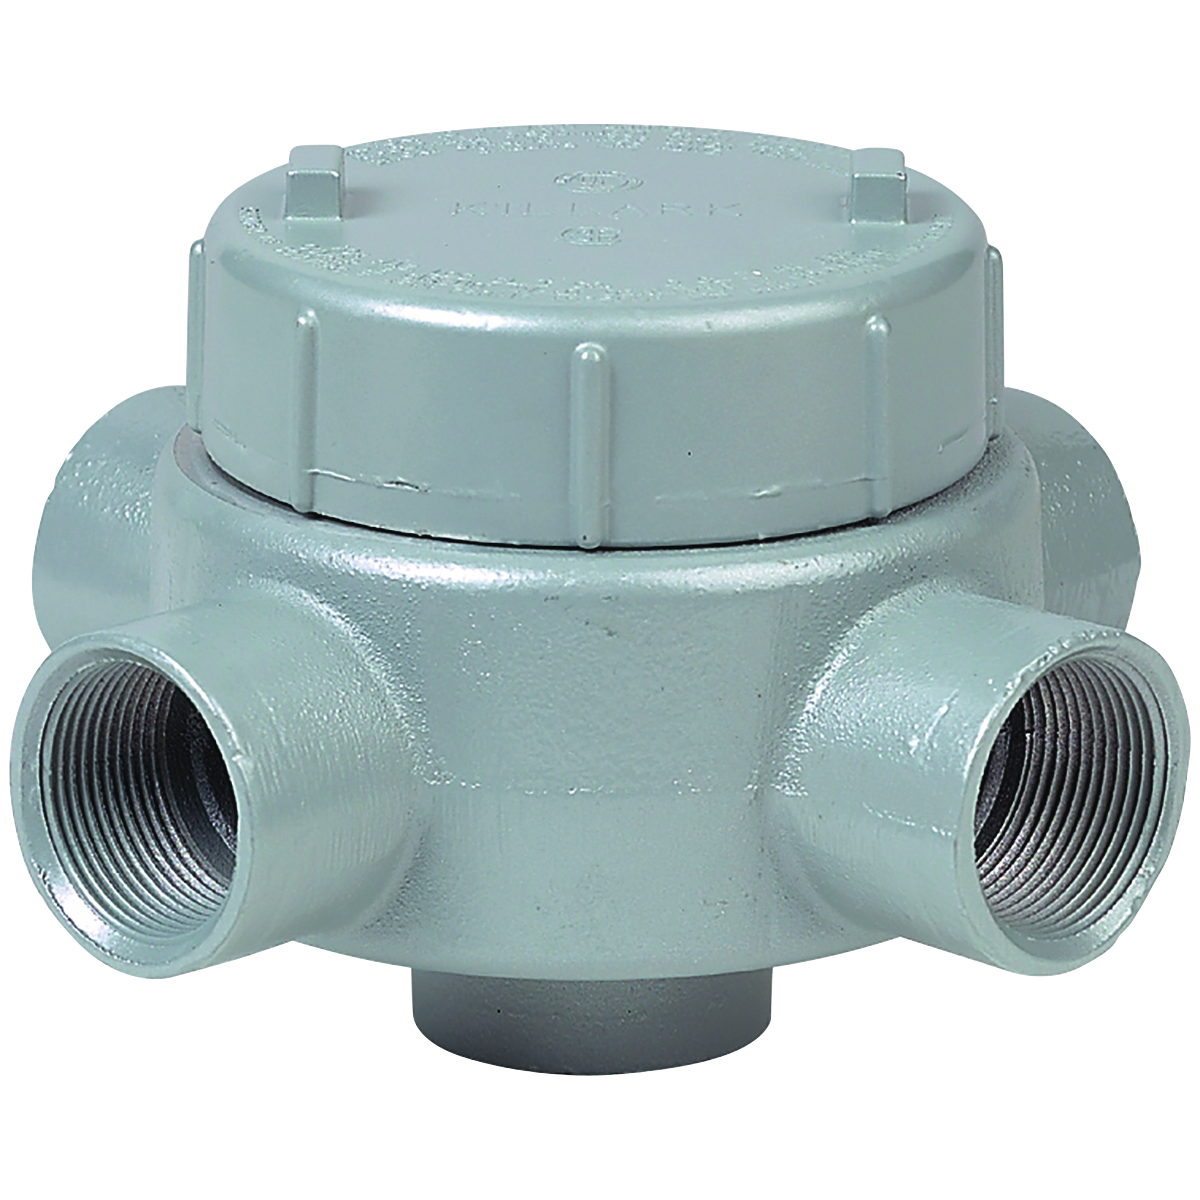 GES SERIES FITTINGS - ALUMINUM - XAT TYPE OUTLET BODY - HUB SIZE 1-1/4IN - VOLUME 42.0 CU IN